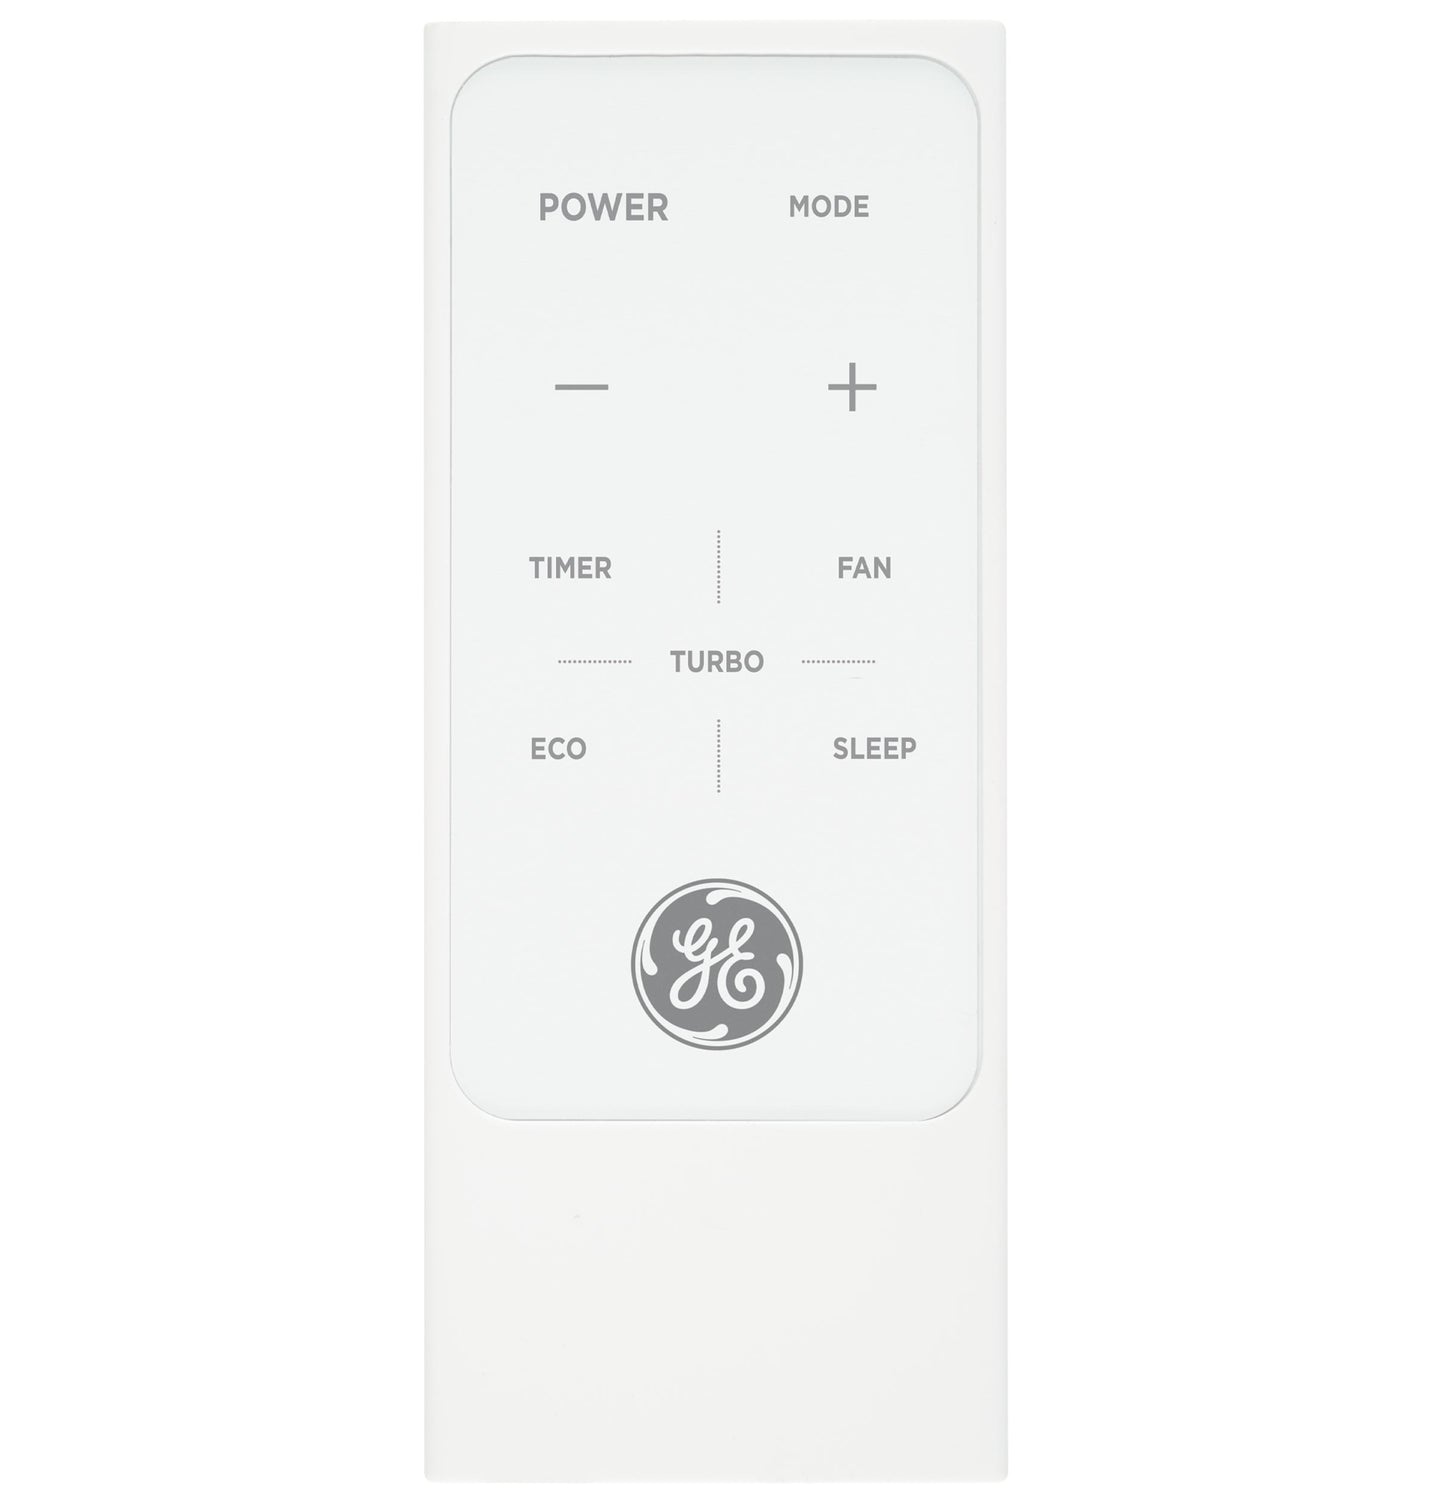 Ge Appliances AKLK14AA Ge® Energy Star® 14,000 Btu Smart Electronic Window Air Conditioner For Large Rooms Up To 700 Sq. Ft.